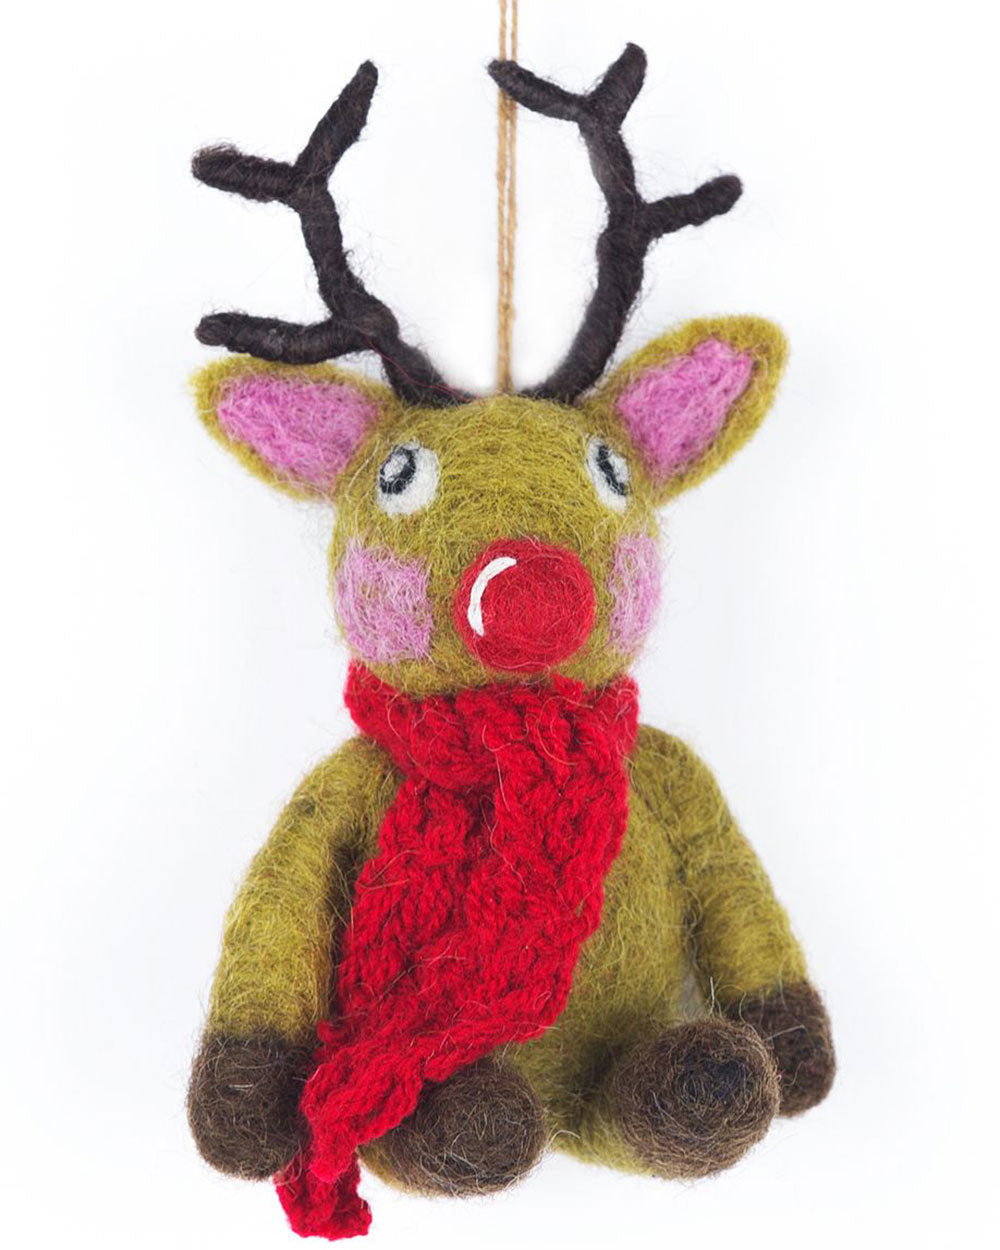 This adorable felt reindeer will definitely put a smile on your face. So, put on those Christmas songs, and happily decorate your tree! Made from 100% Wool with no plastic or glue in sight! This little character is charming in every single way. 